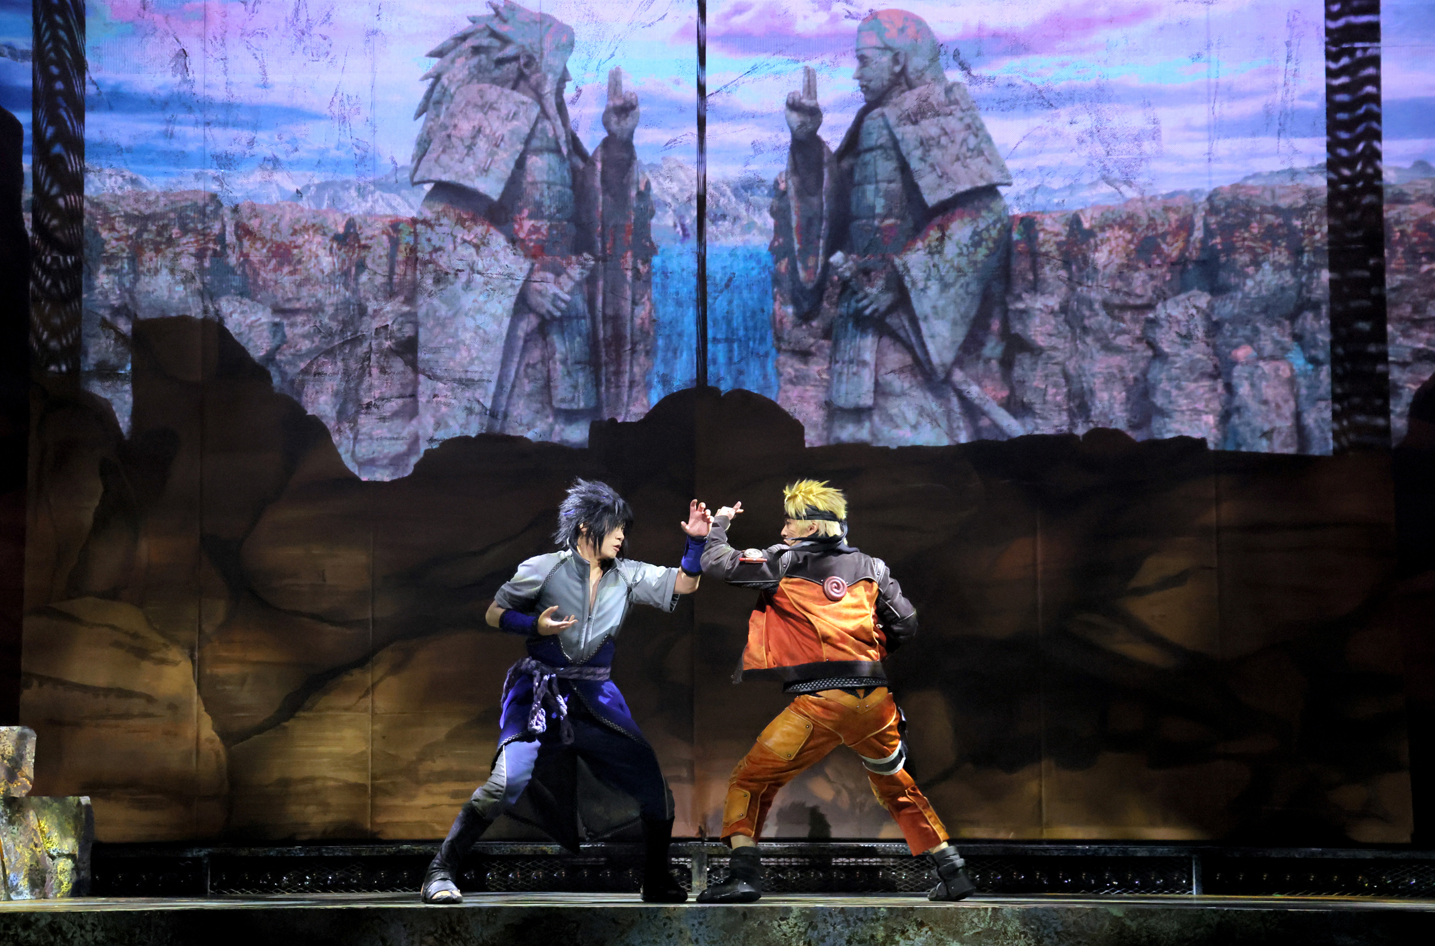 Live Spectacle Naruto Releases New Solo Visuals, Event News